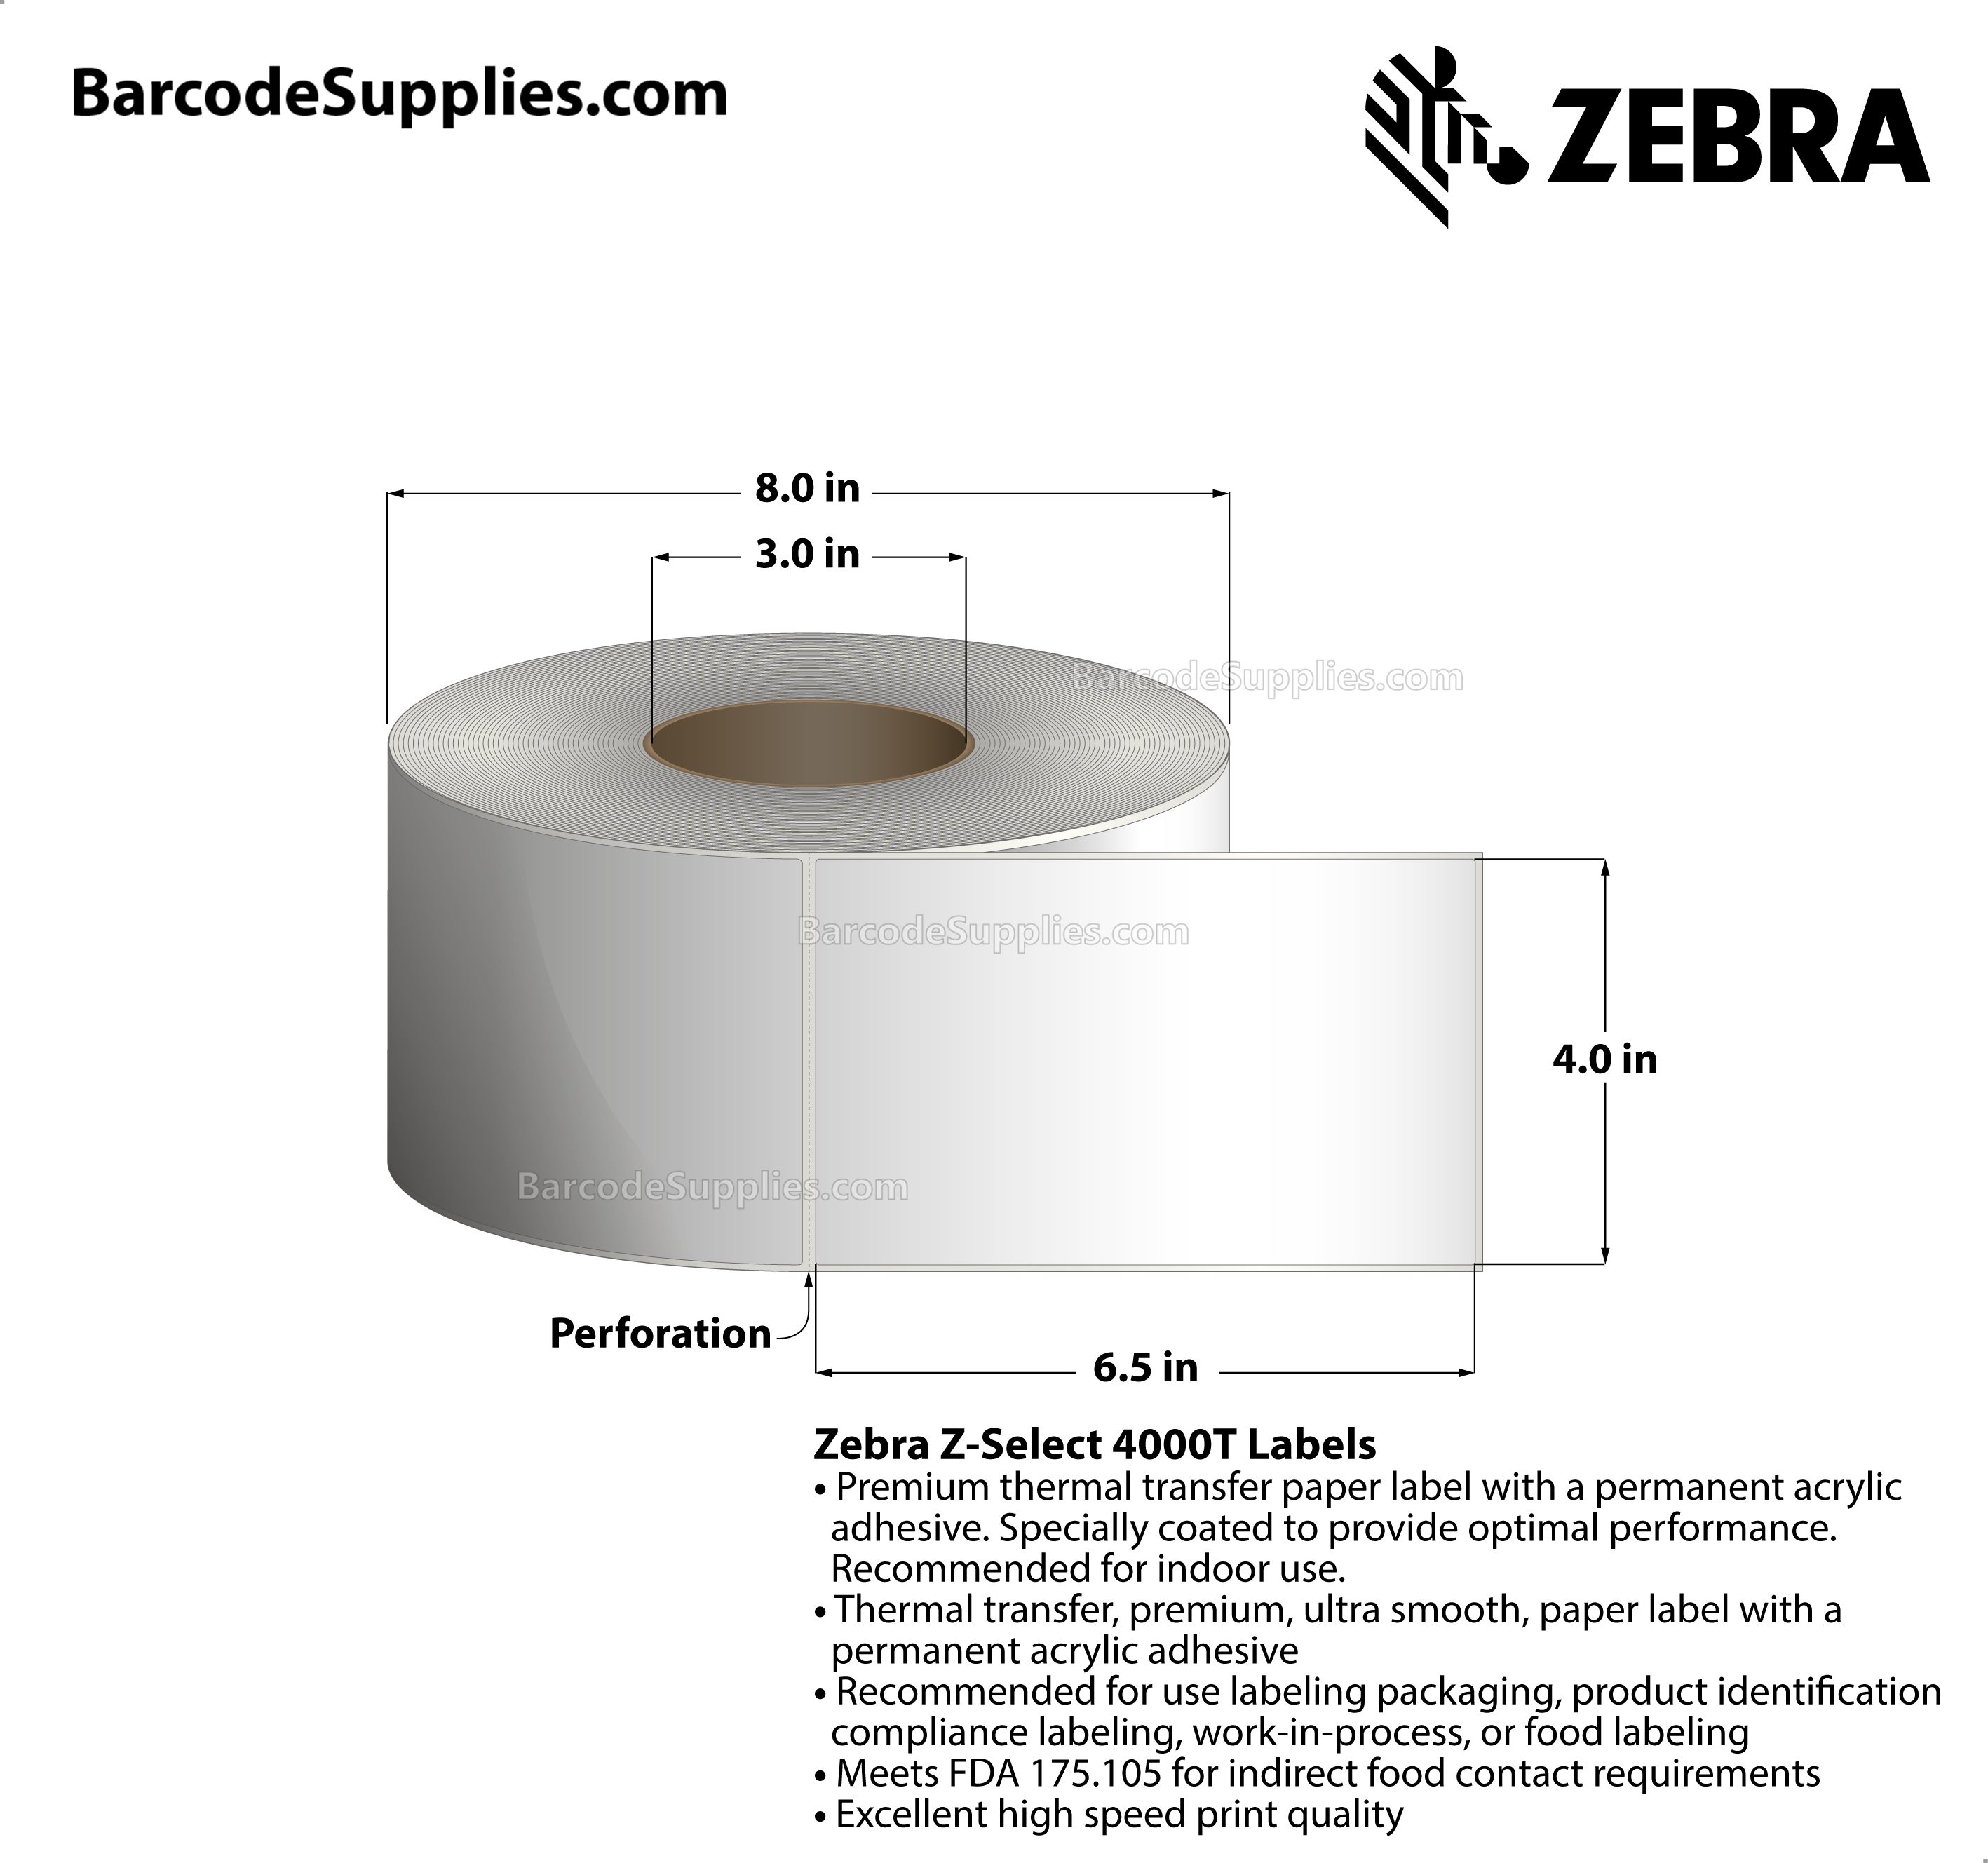 4 x 6.5 Thermal Transfer White Z-Select 4000T Labels With Permanent Adhesive - Perforated - 840 Labels Per Roll - Carton Of 4 Rolls - 3360 Labels Total - MPN: 73298